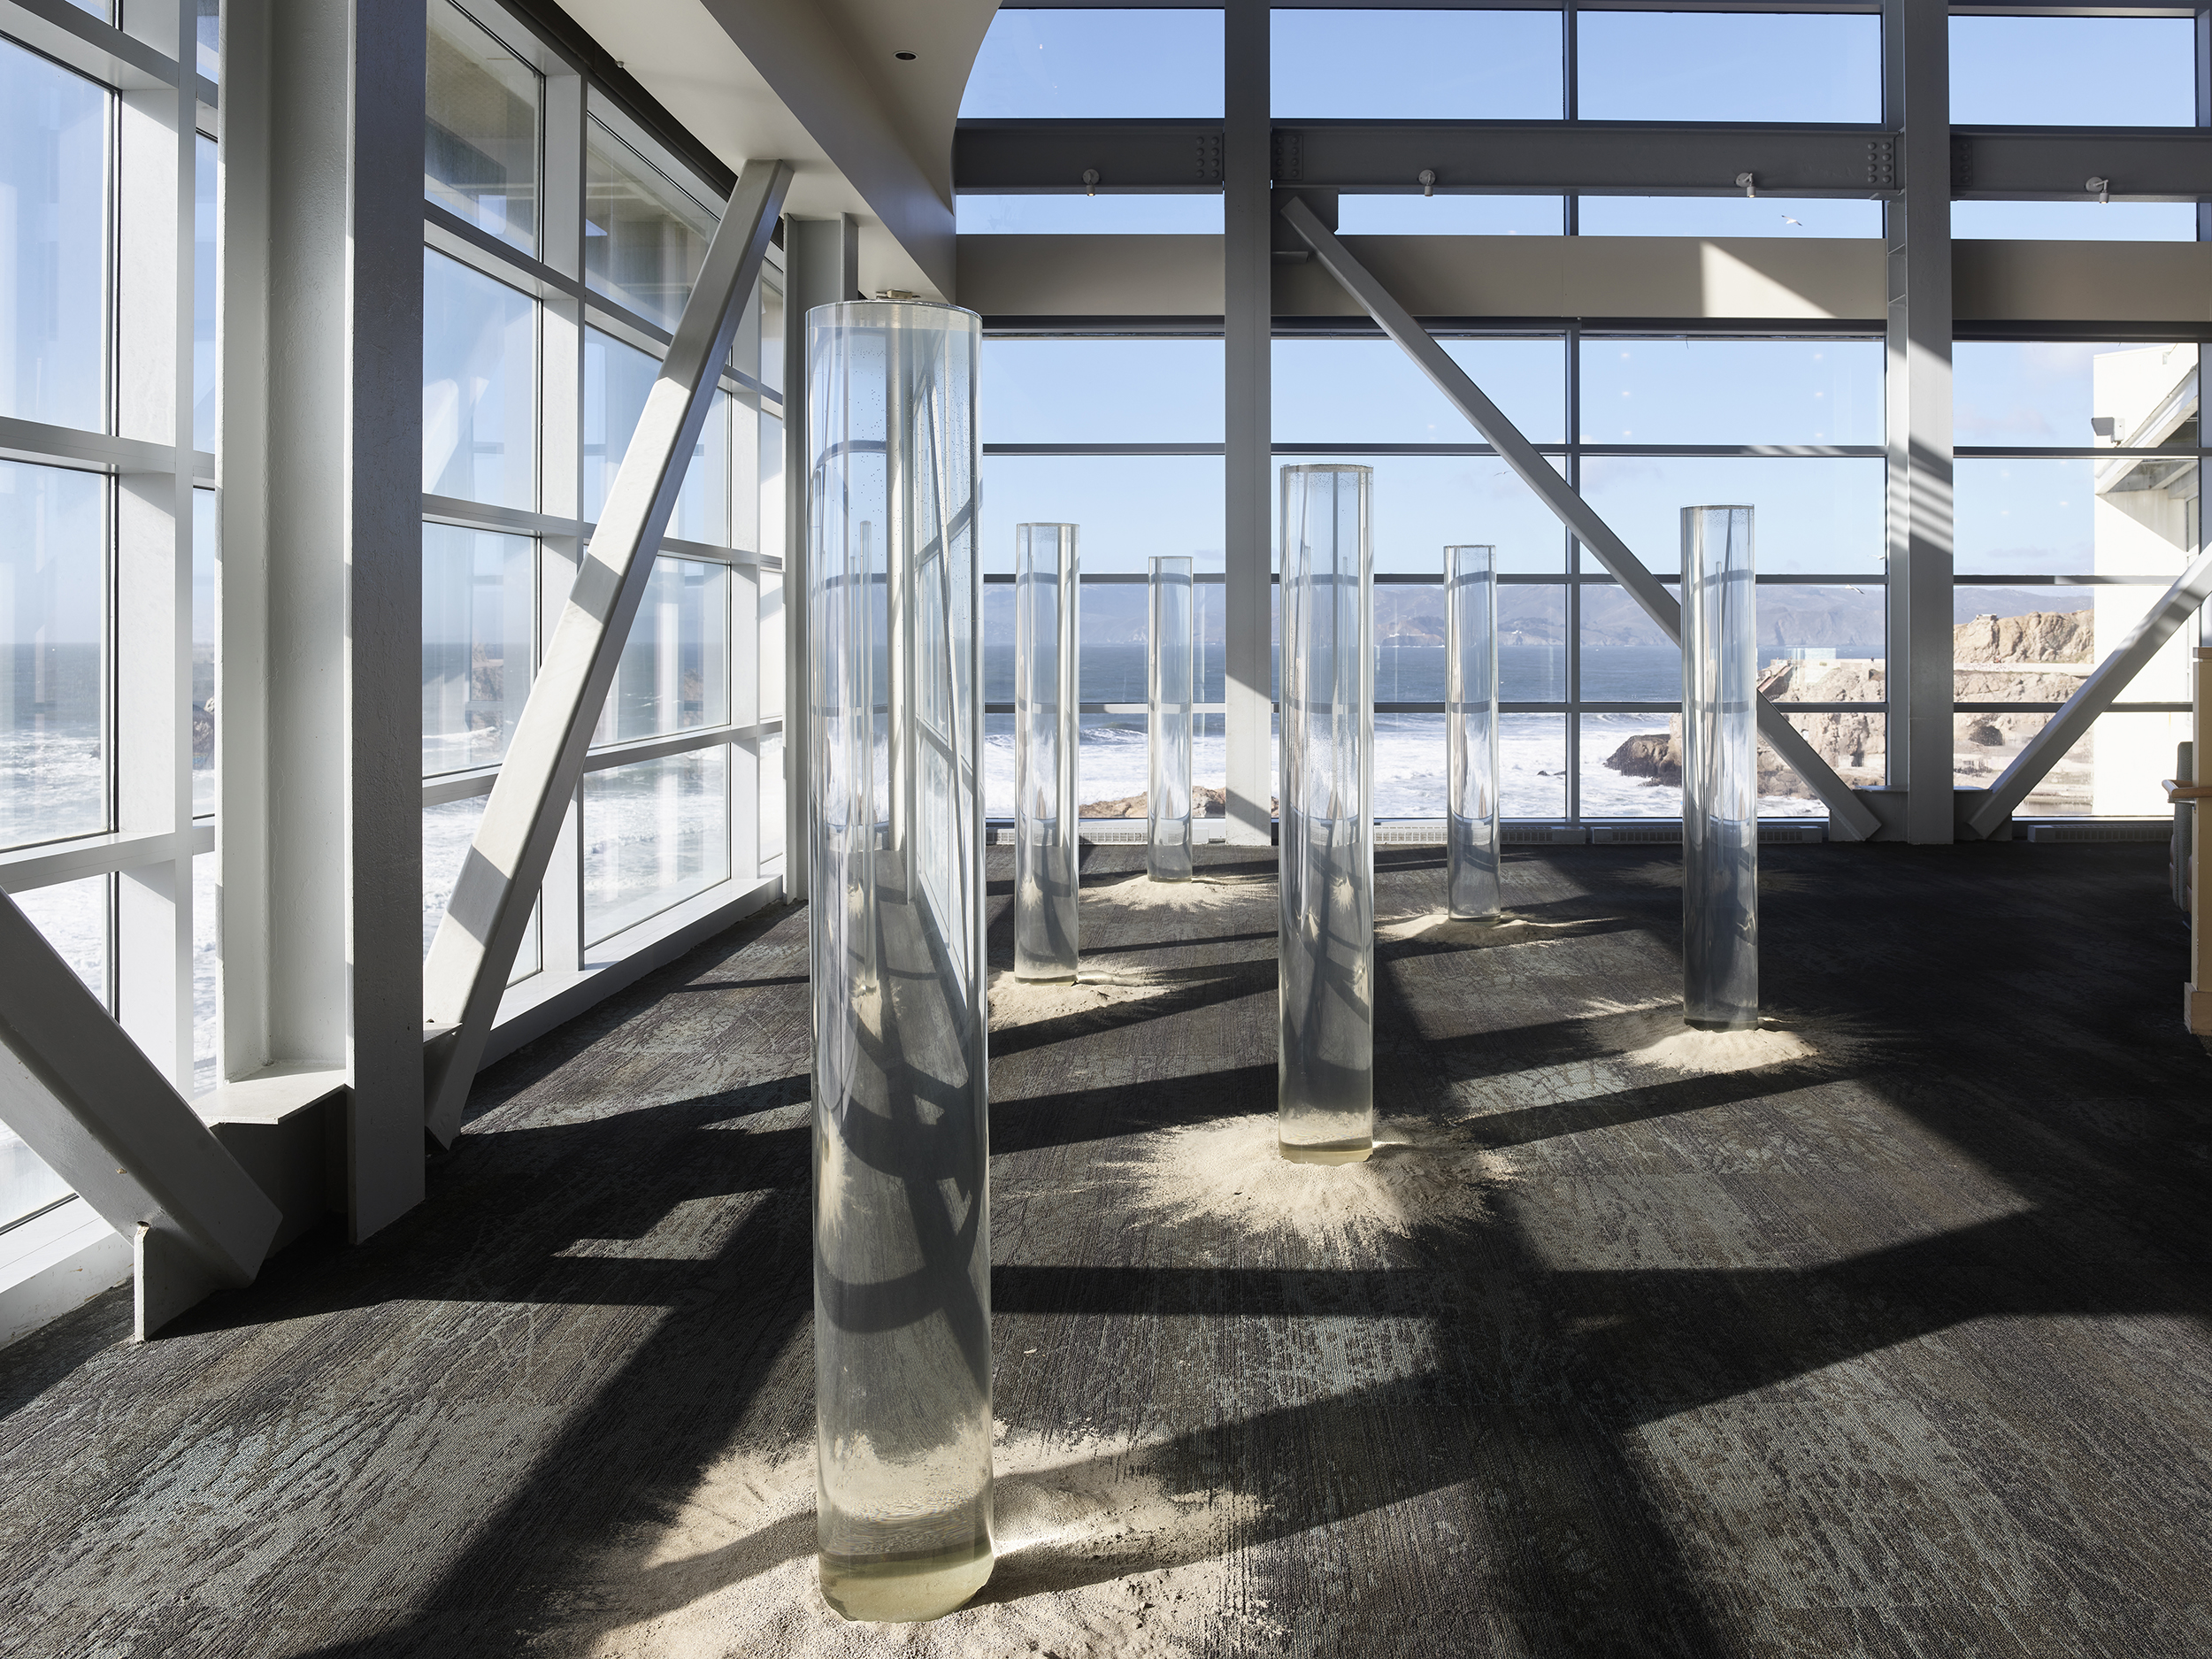 Exhibit at Former Cliff House Takes on Climate Crisis